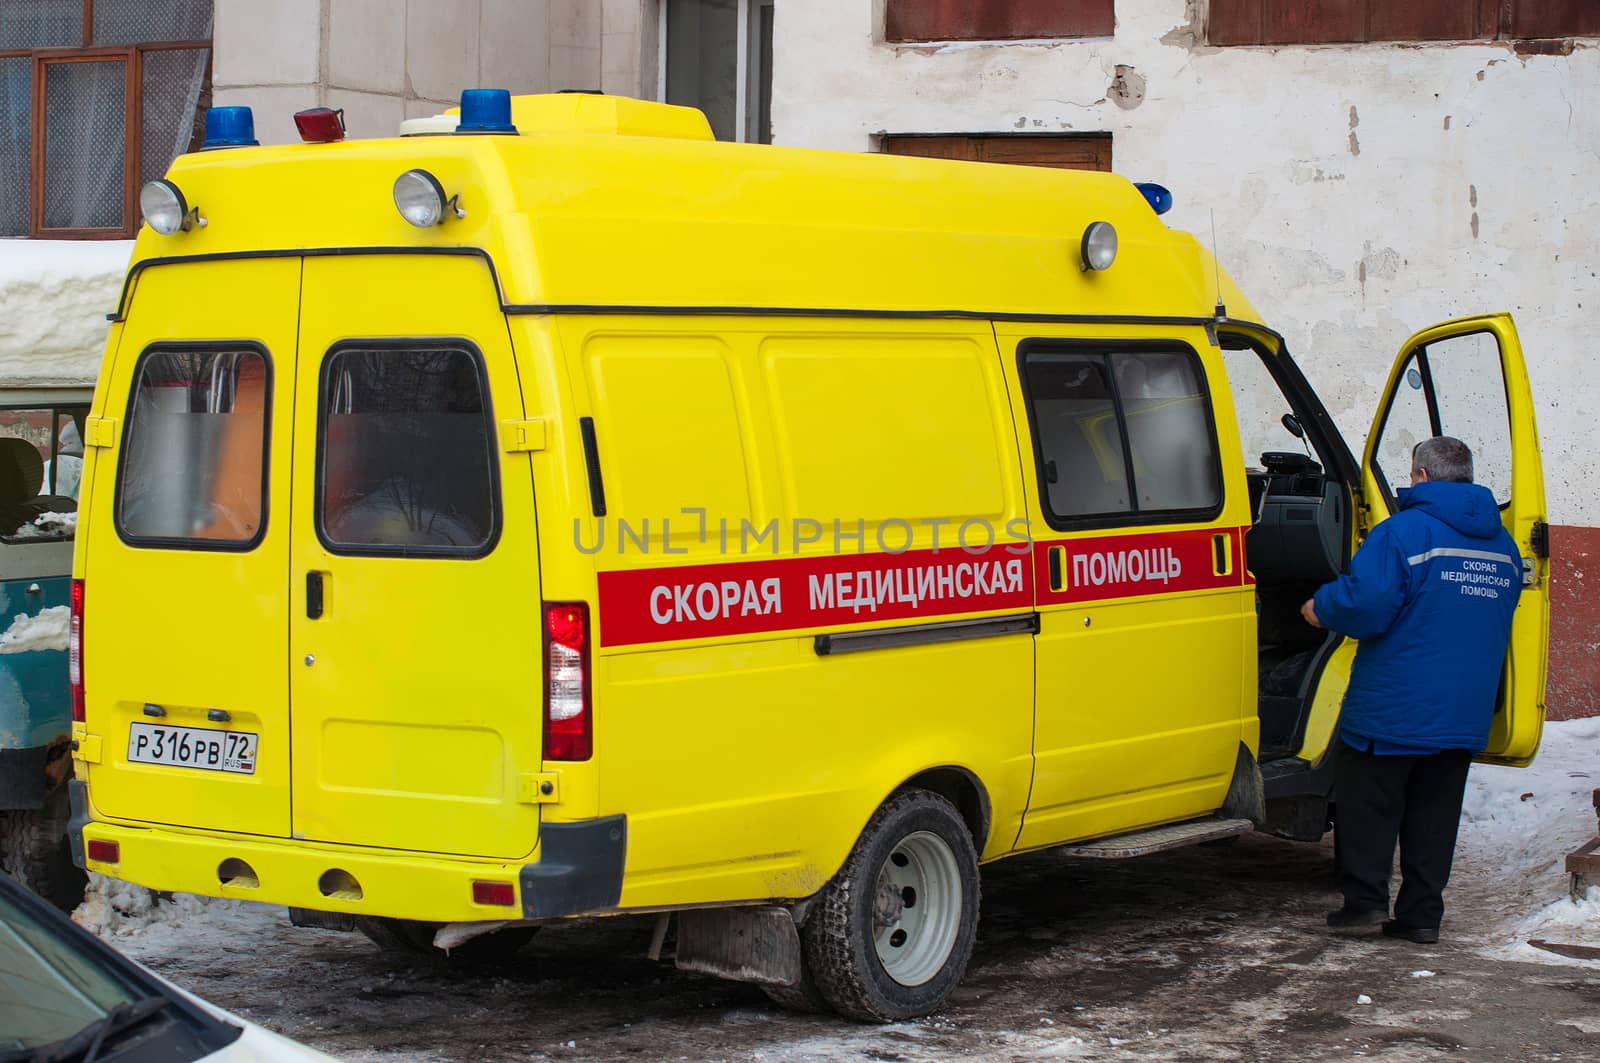 The yellow car of an emergency medical service costs at a house entrance. Tyumen, Russia